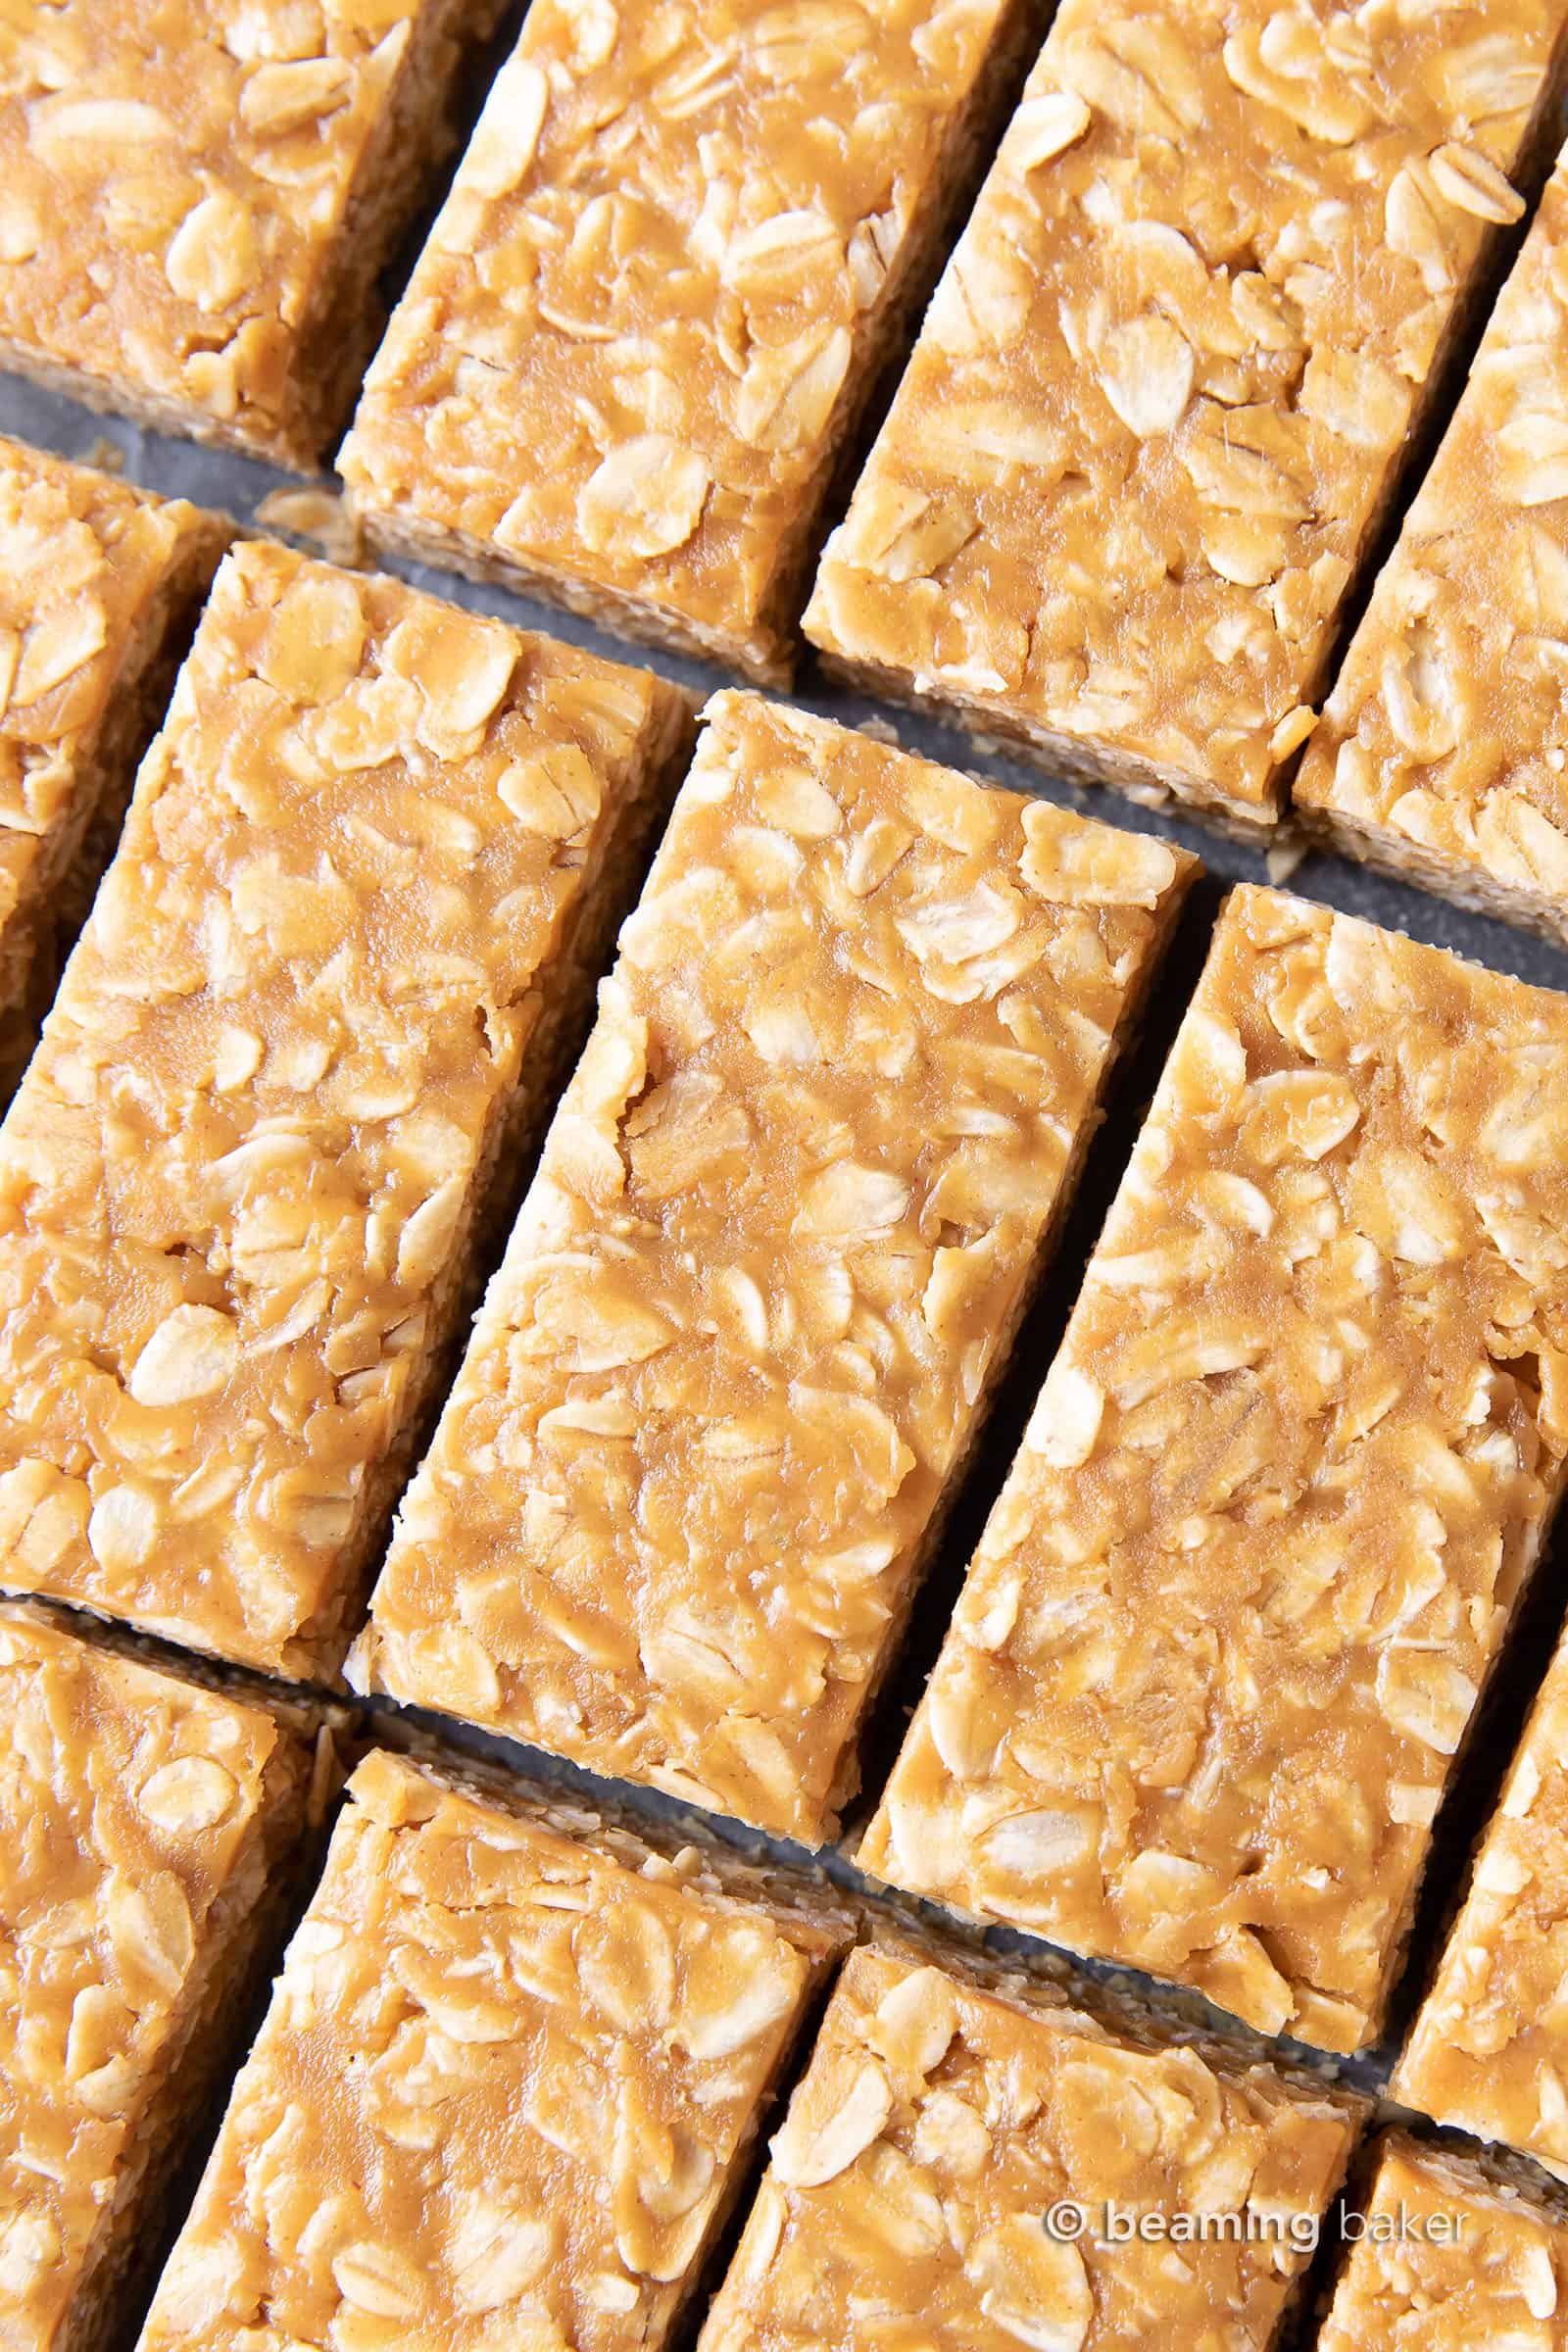 3 Ingredient No Bake Peanut Butter Granola Bars: this homemade peanut butter granola bars recipe is so EASY! The best oatmeal peanut butter granola bars recipe without honey, that tastes like honey roasted peanuts. Healthy, Vegan, Gluten Free. #PeanutButter #GranolaBars #NoBake #Oatmeal | Recipe at BeamingBaker.com